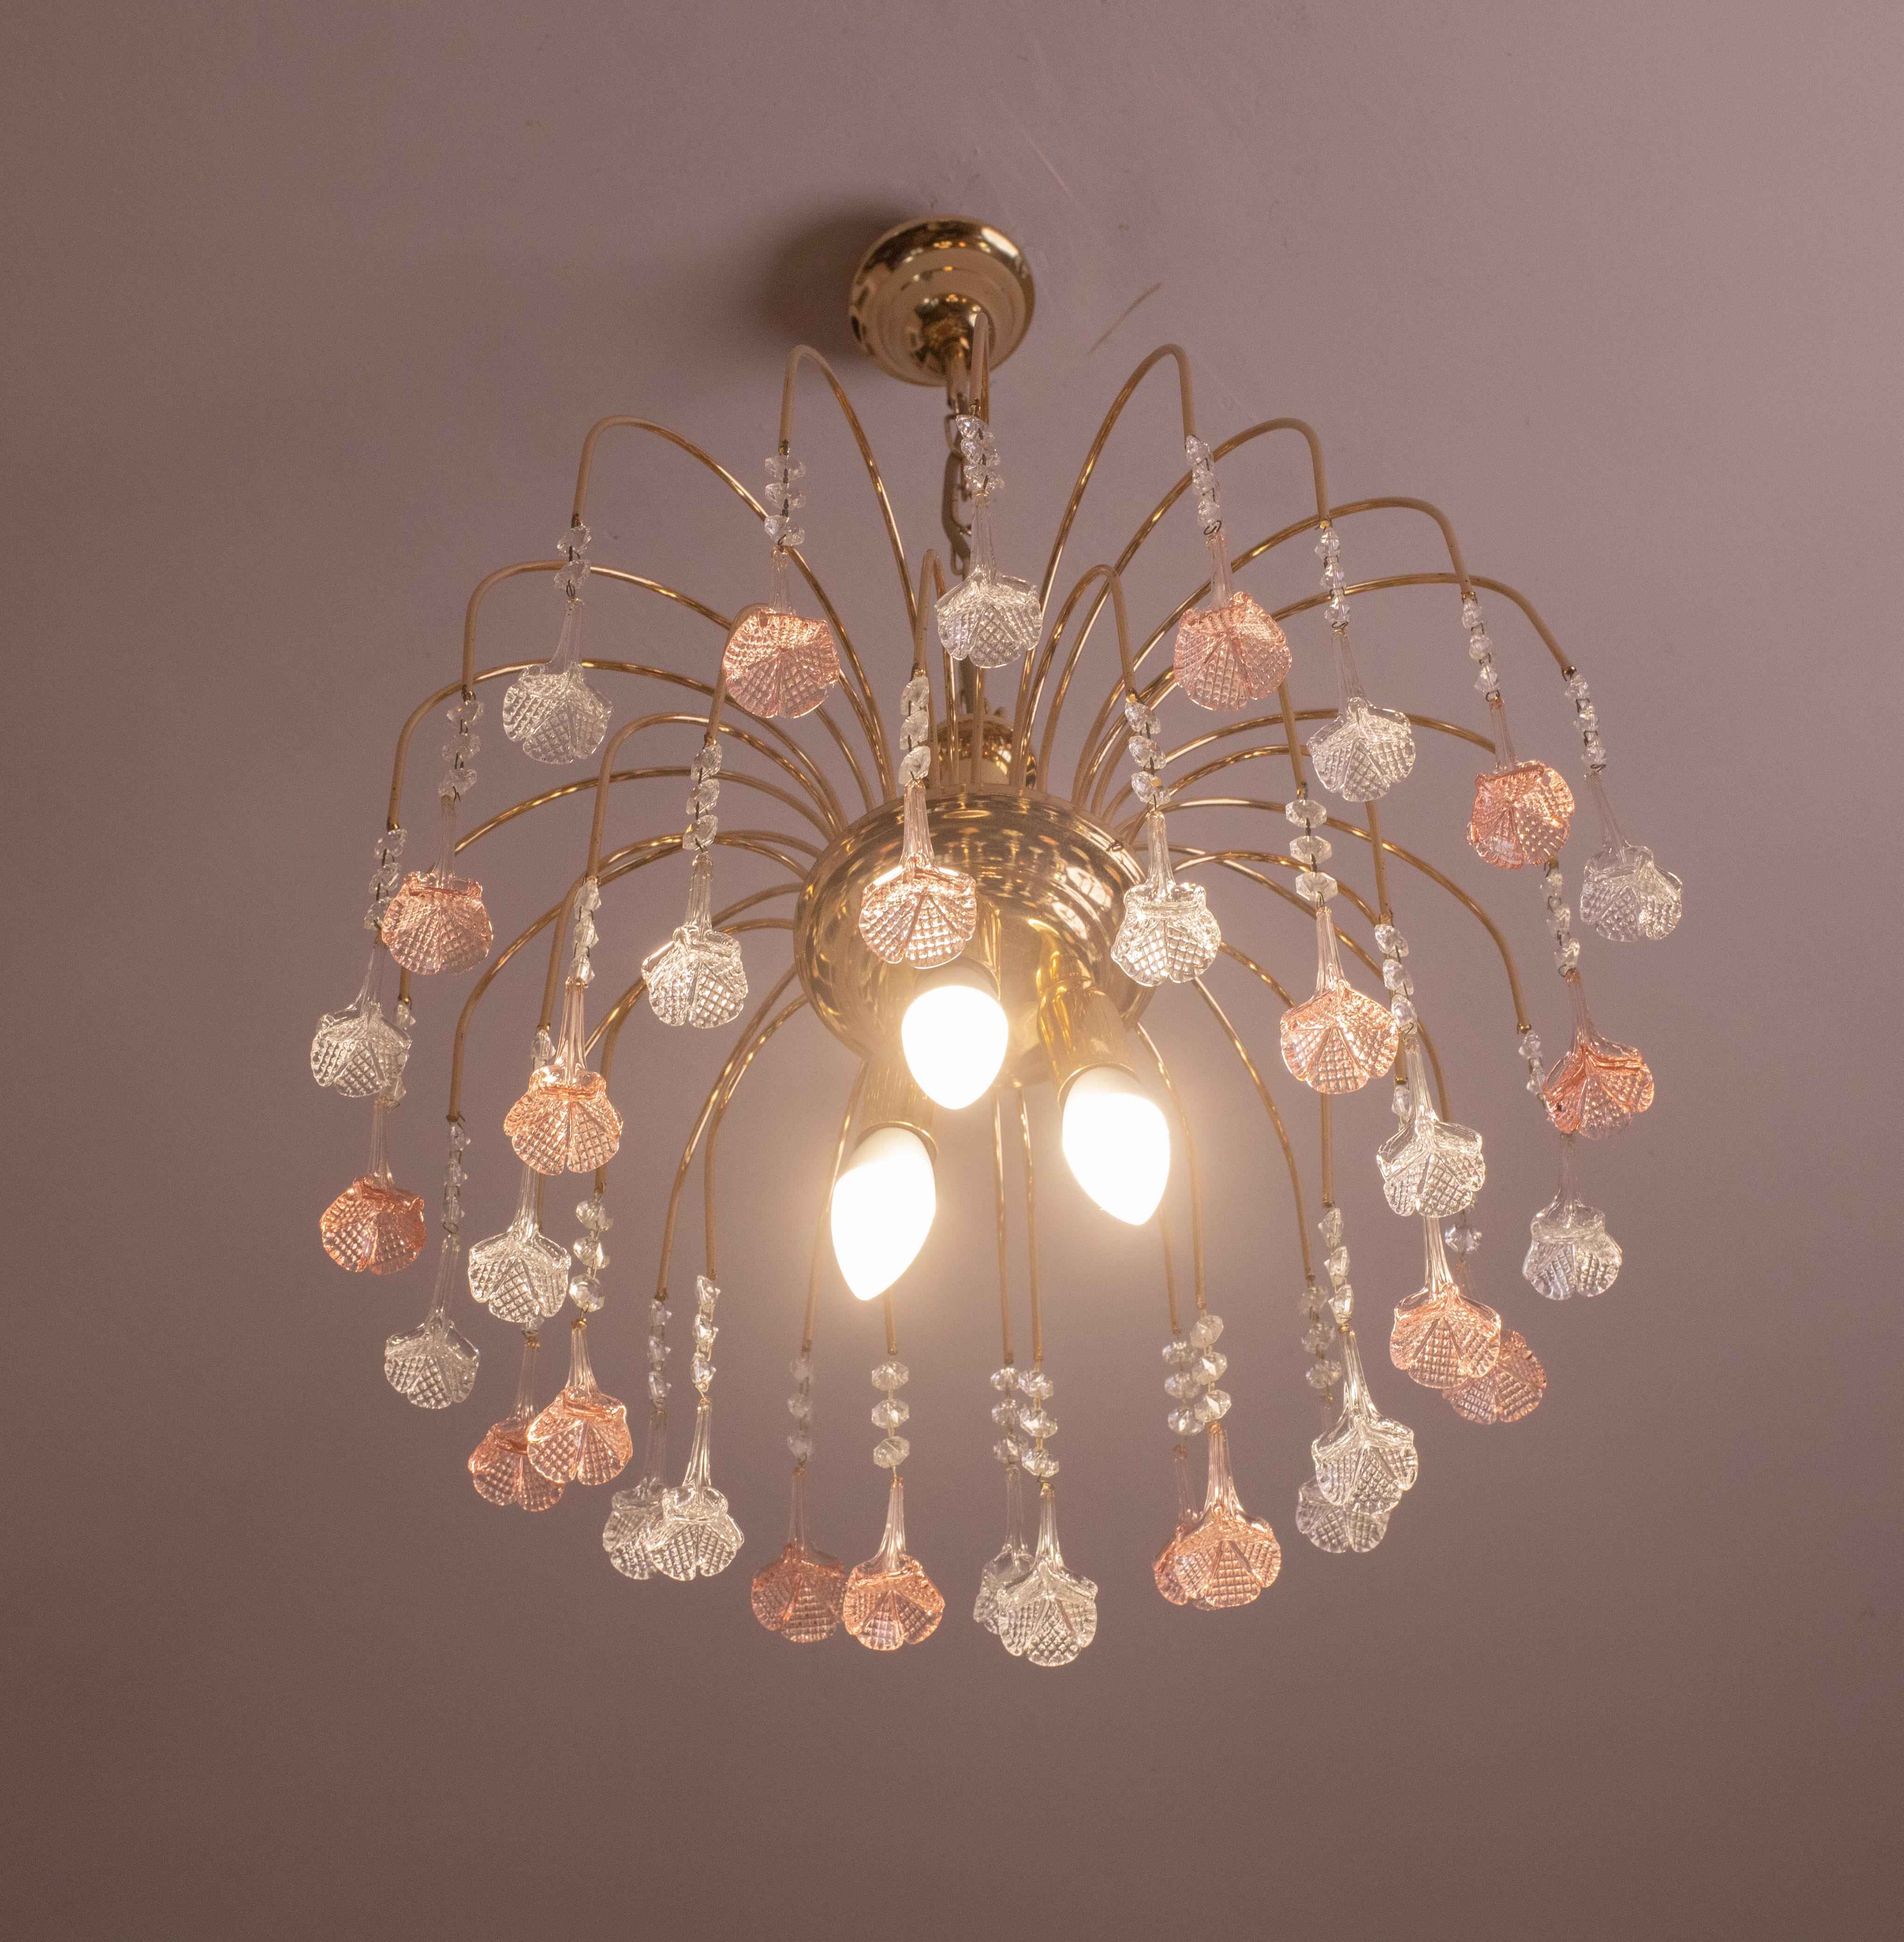 Brigitte Bardot, Pink and Trasparent Murano Flowers Chandelier, 1970s For Sale 6